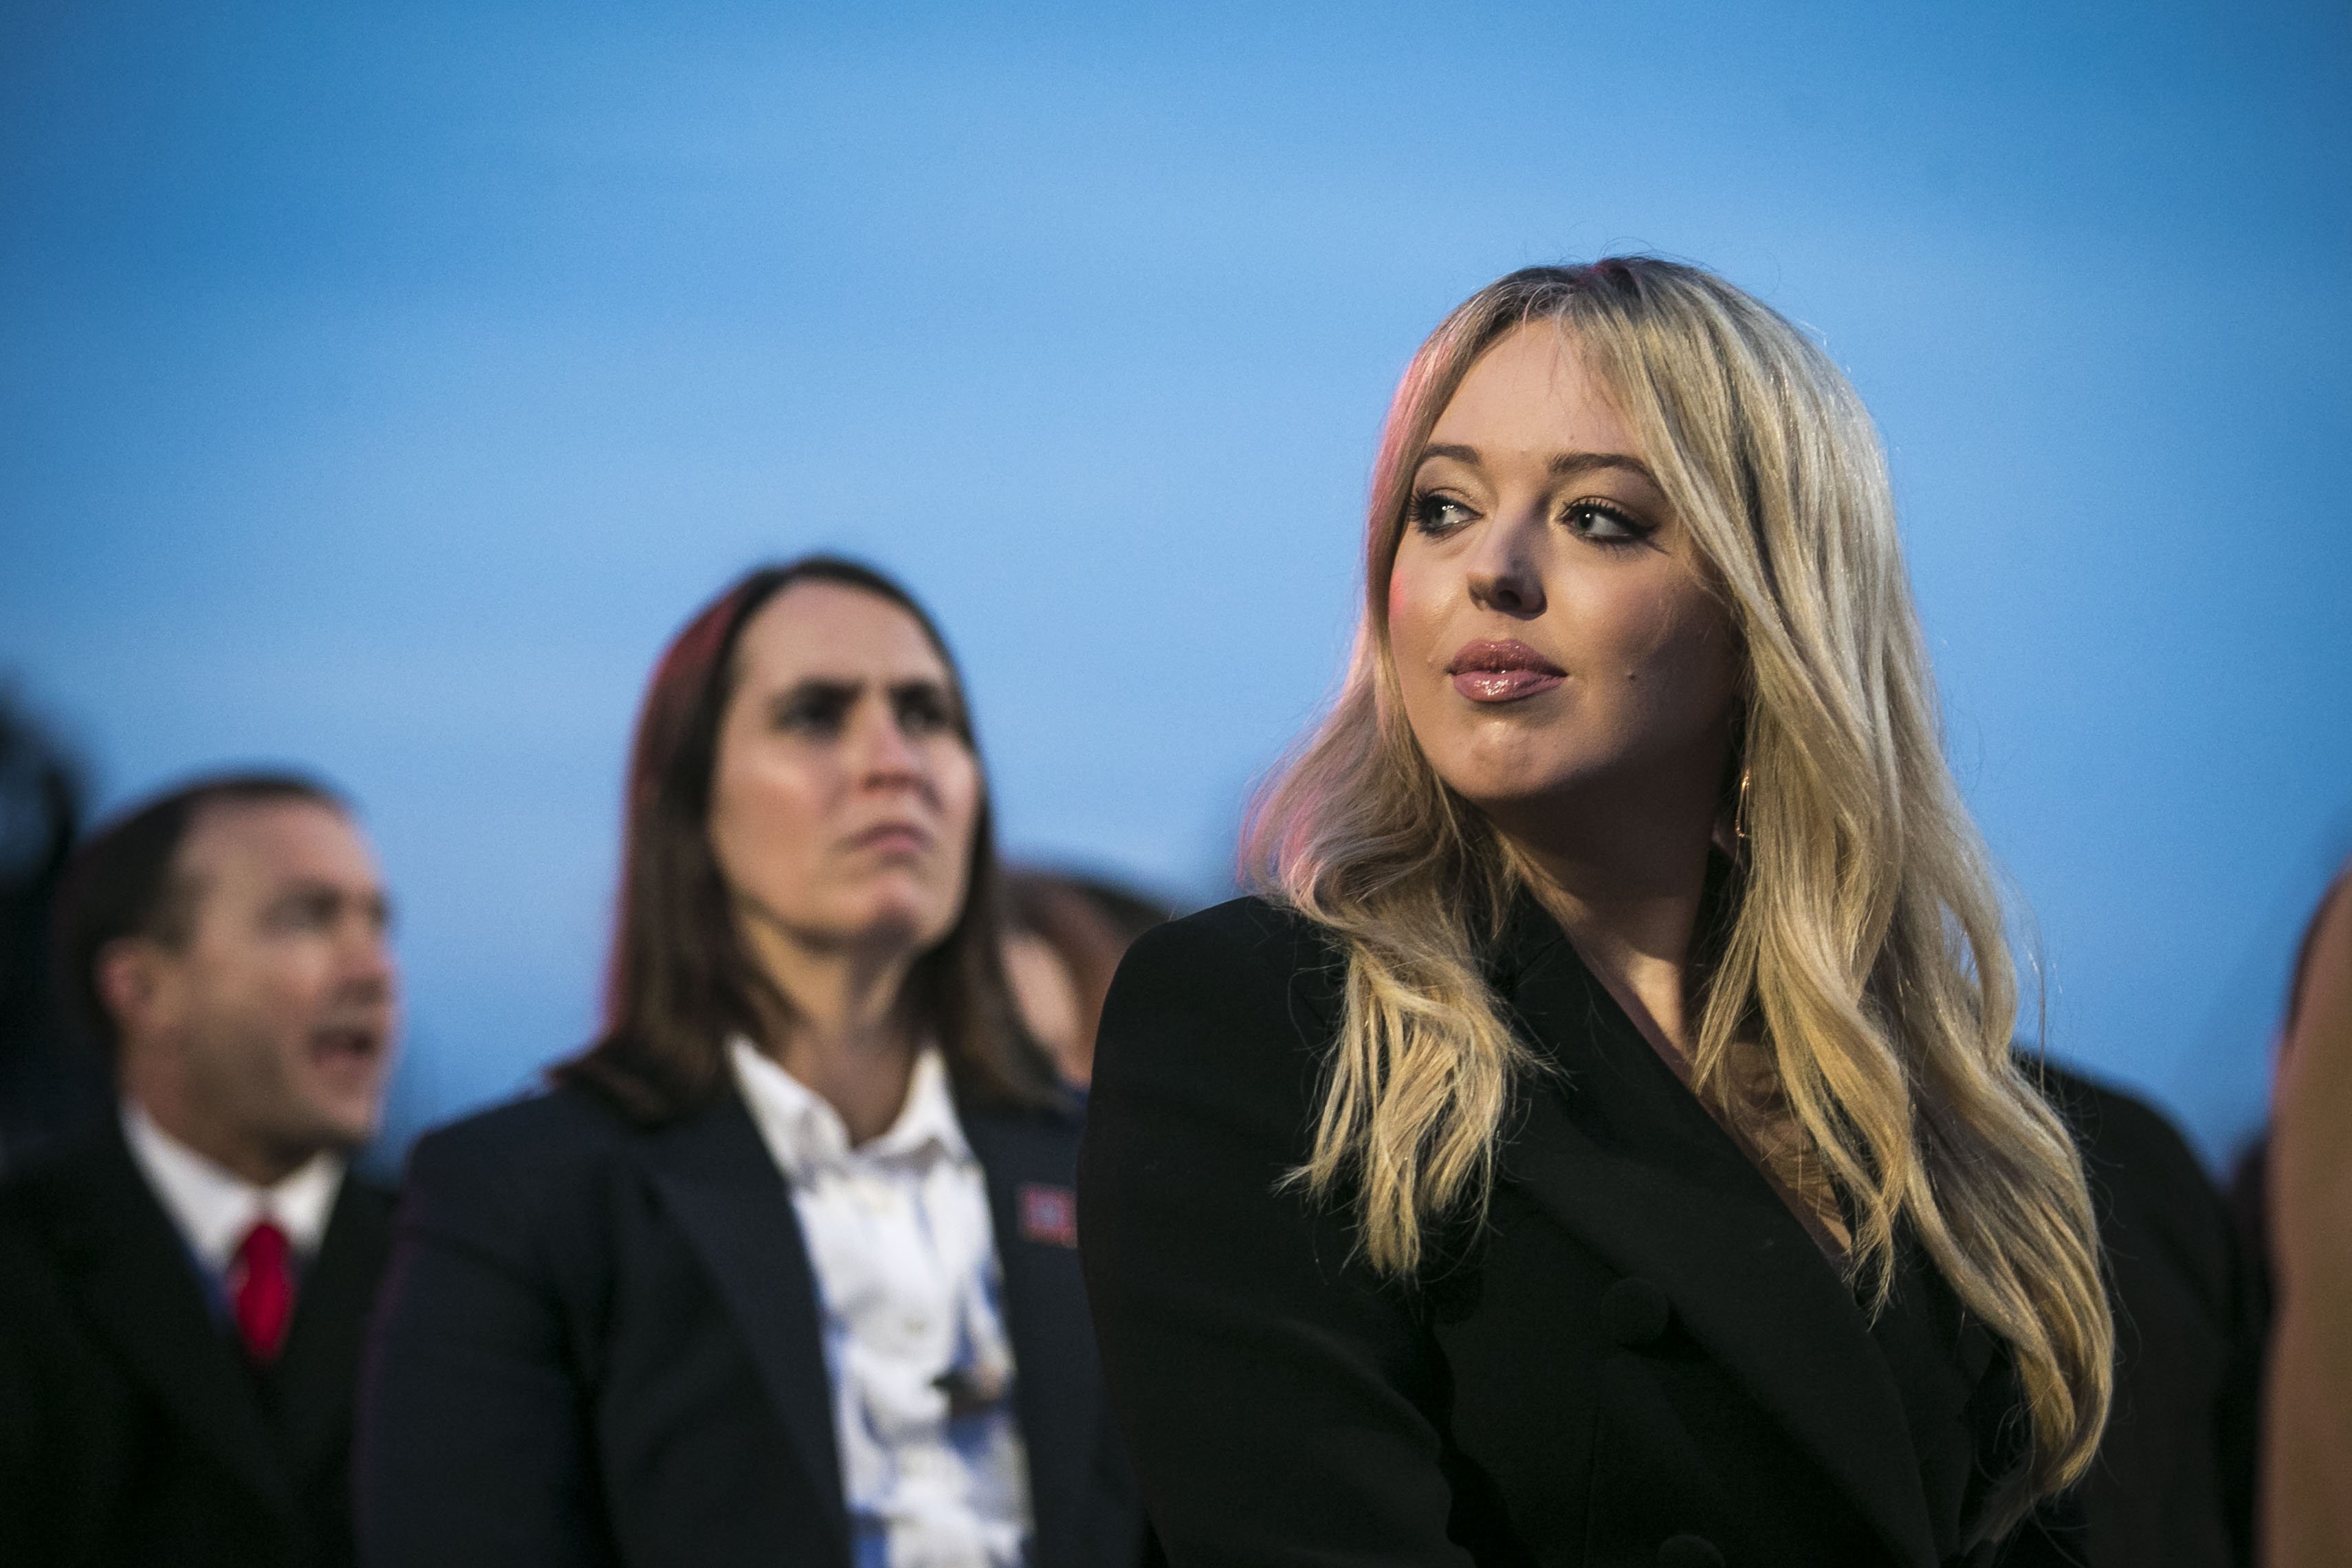  Tiffany Trump, daughter of U.S. President Donald Trump, attends the 95th annual national Christmas tree lighting ceremony held by the National Park Service on the Ellipse near the White House on November 30, 2017  | Photo: GettyImages